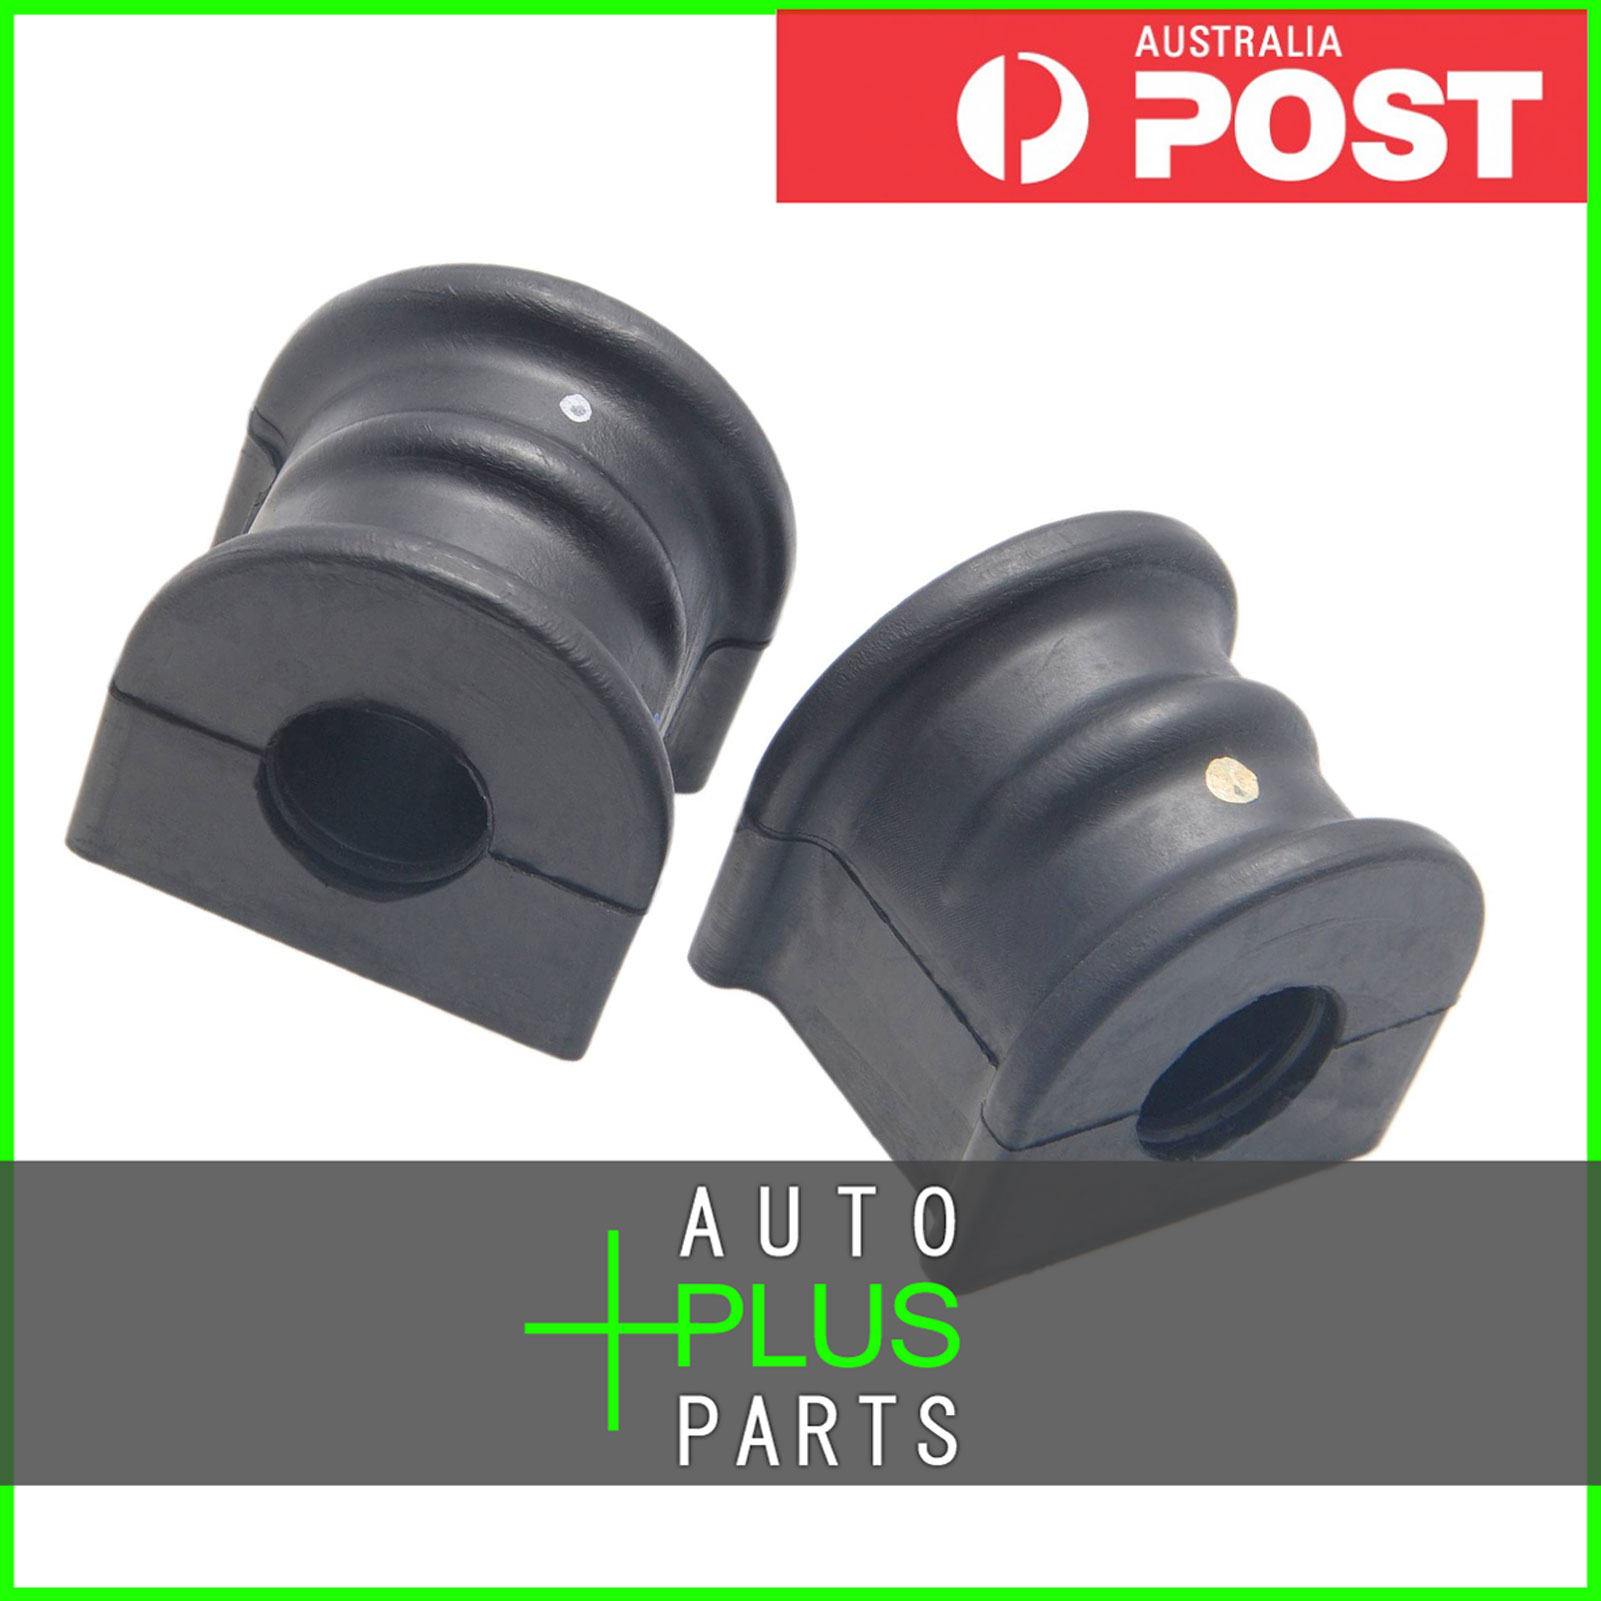 Fits LINCOLN MKT TP4 2010-Current - Rear Stabilizer Bush Kit 20mm Sway Bar Product Photo